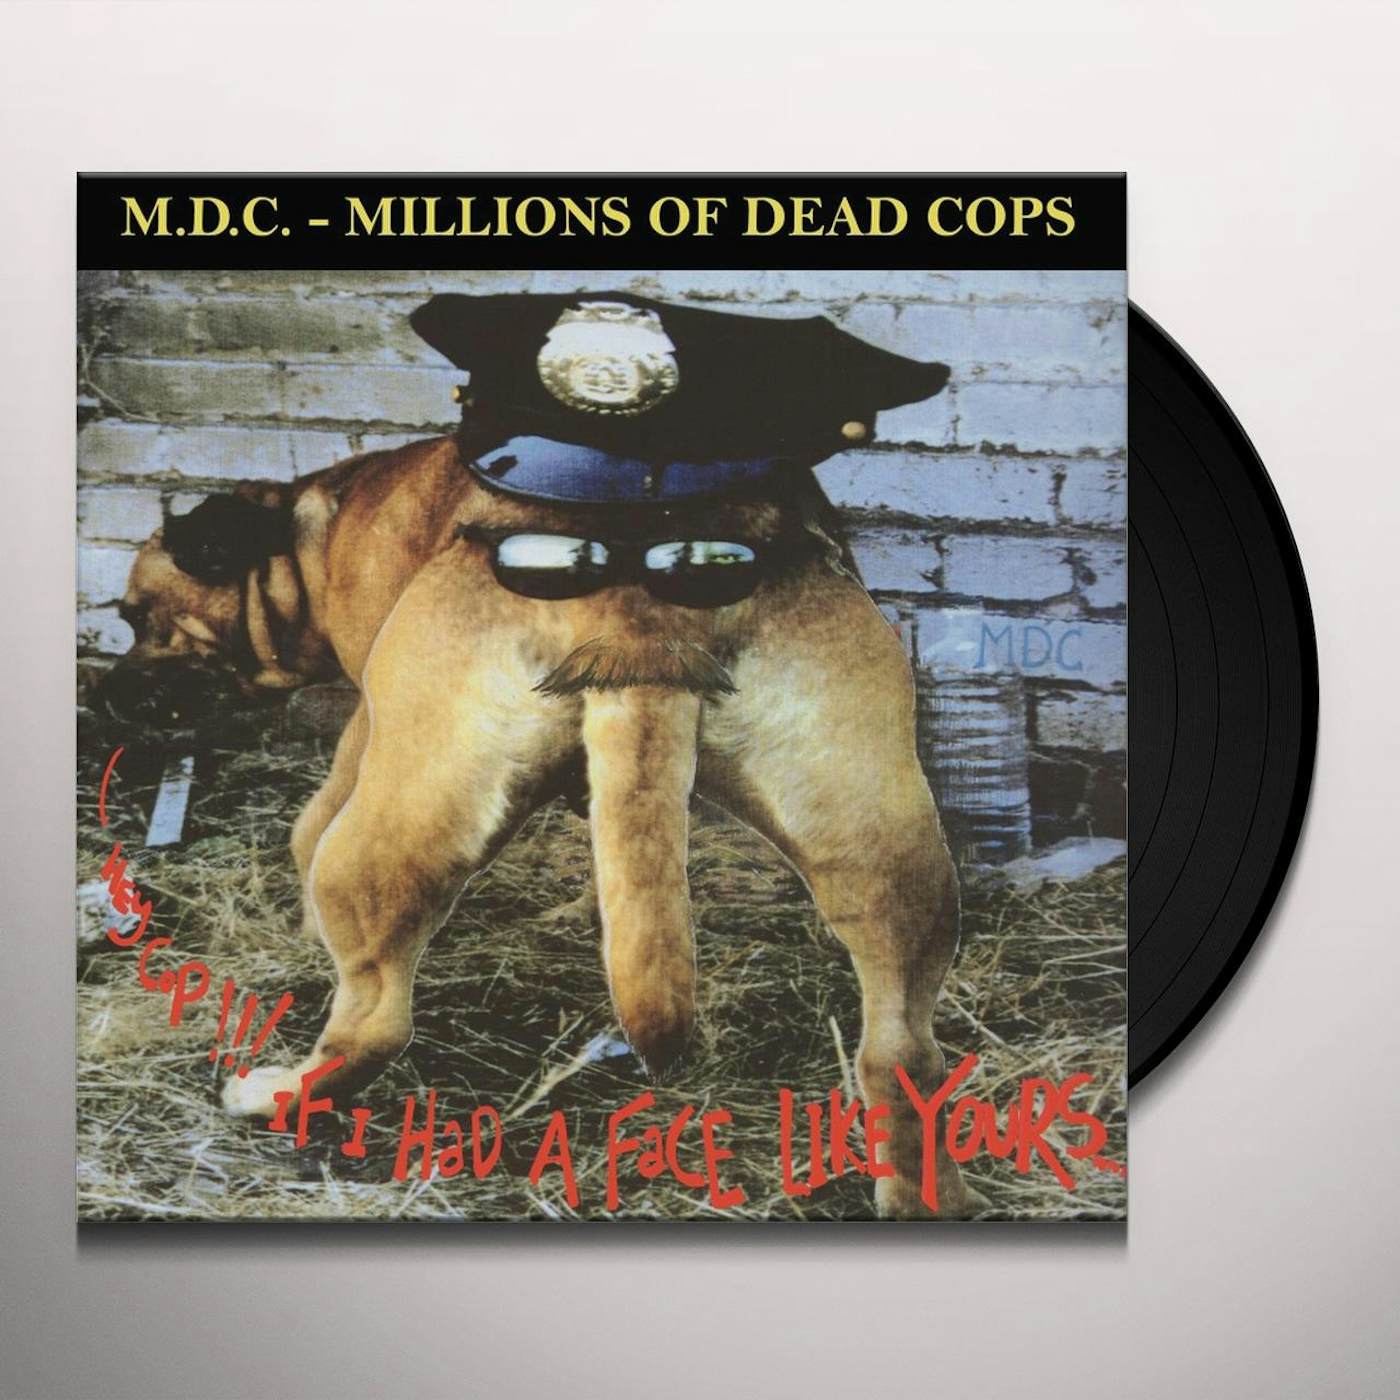 MDC HEY COP!!! IF I HAD A FACE LIKE YOURS Vinyl Record